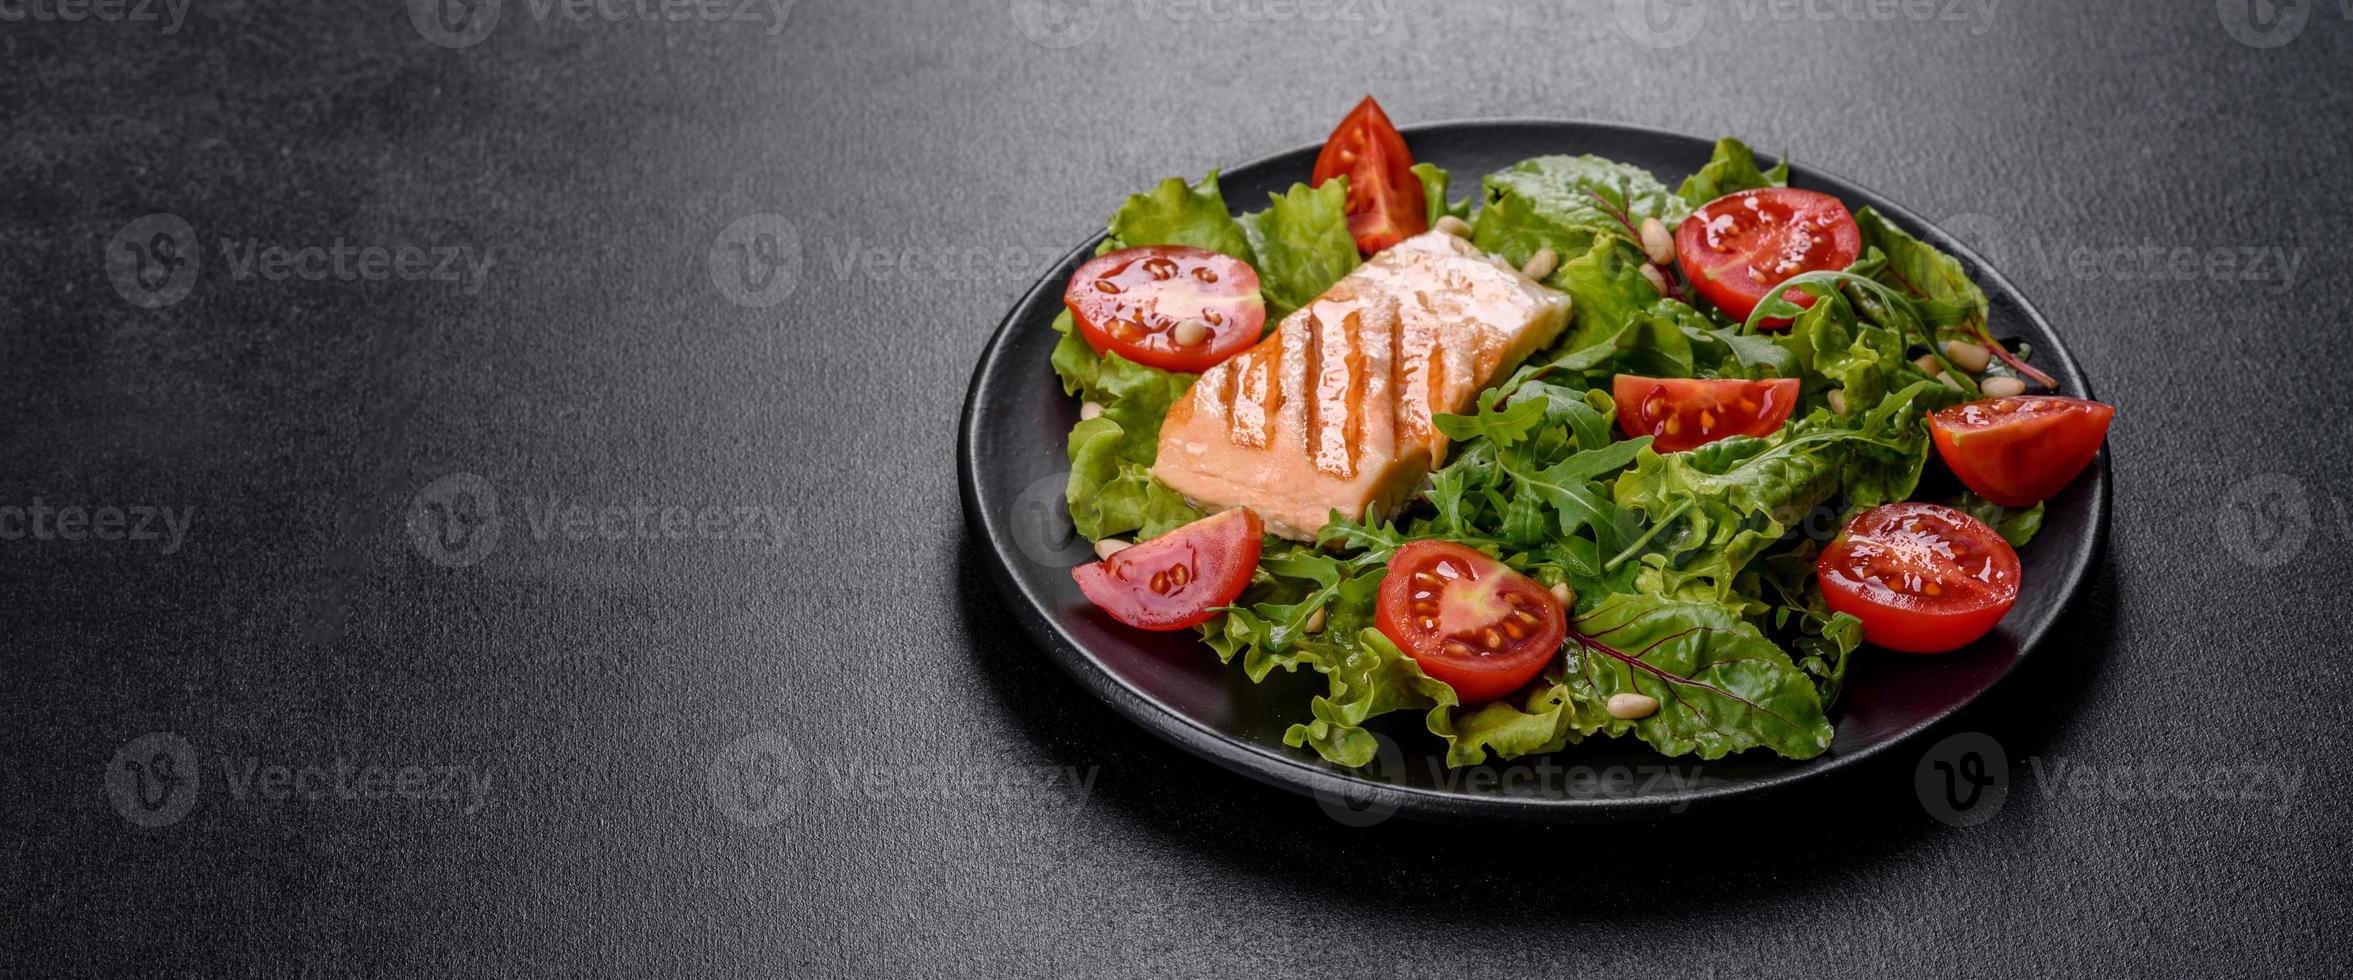 Delicious fresh salad with fish, tomatoes and lettuce leaves photo